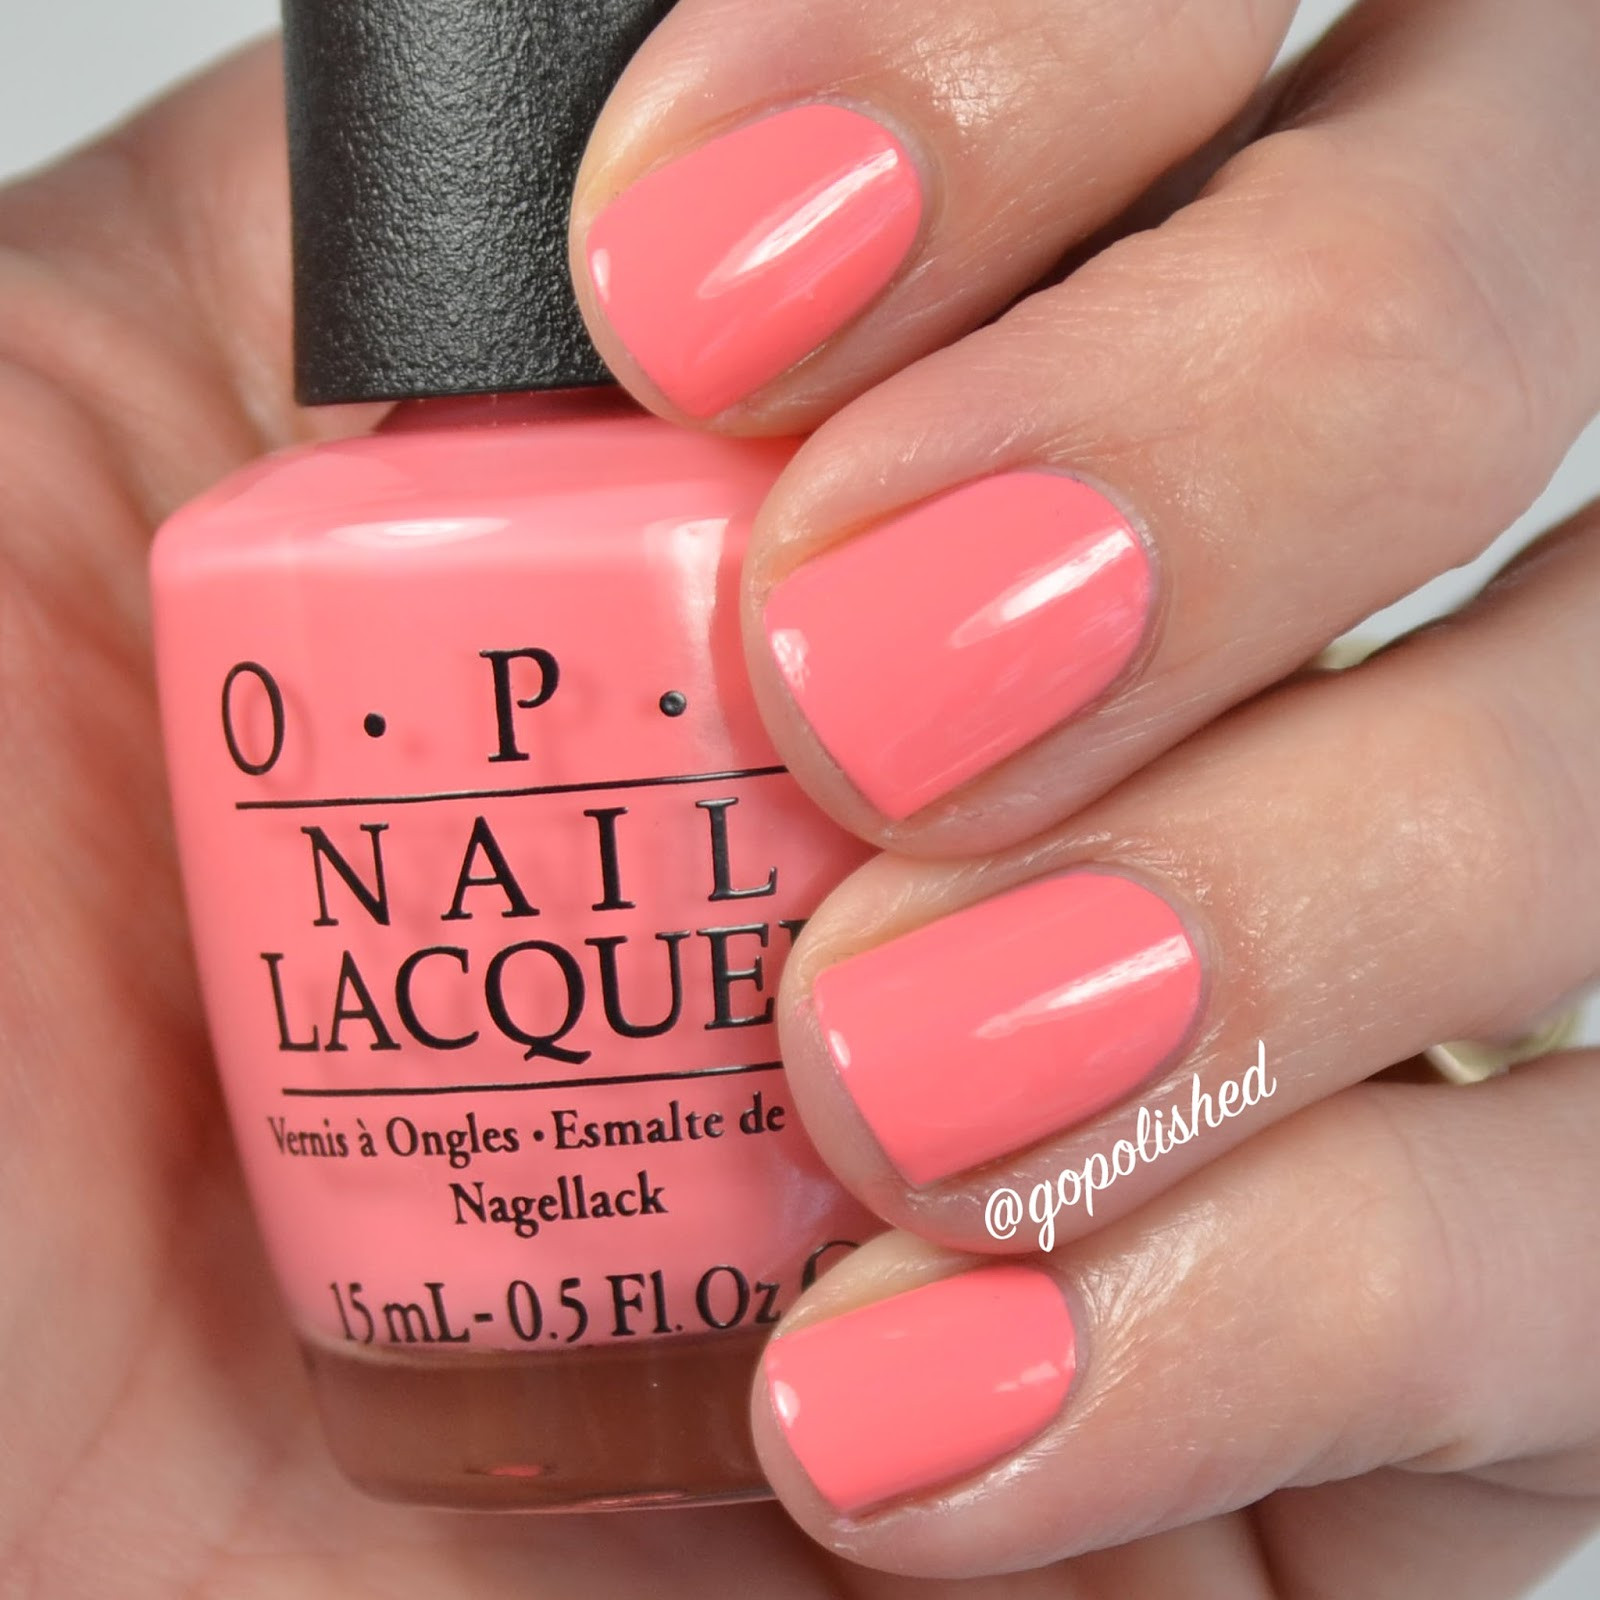 Good Summer Nail Colors
 Go Polished OPI New Orlean parisons